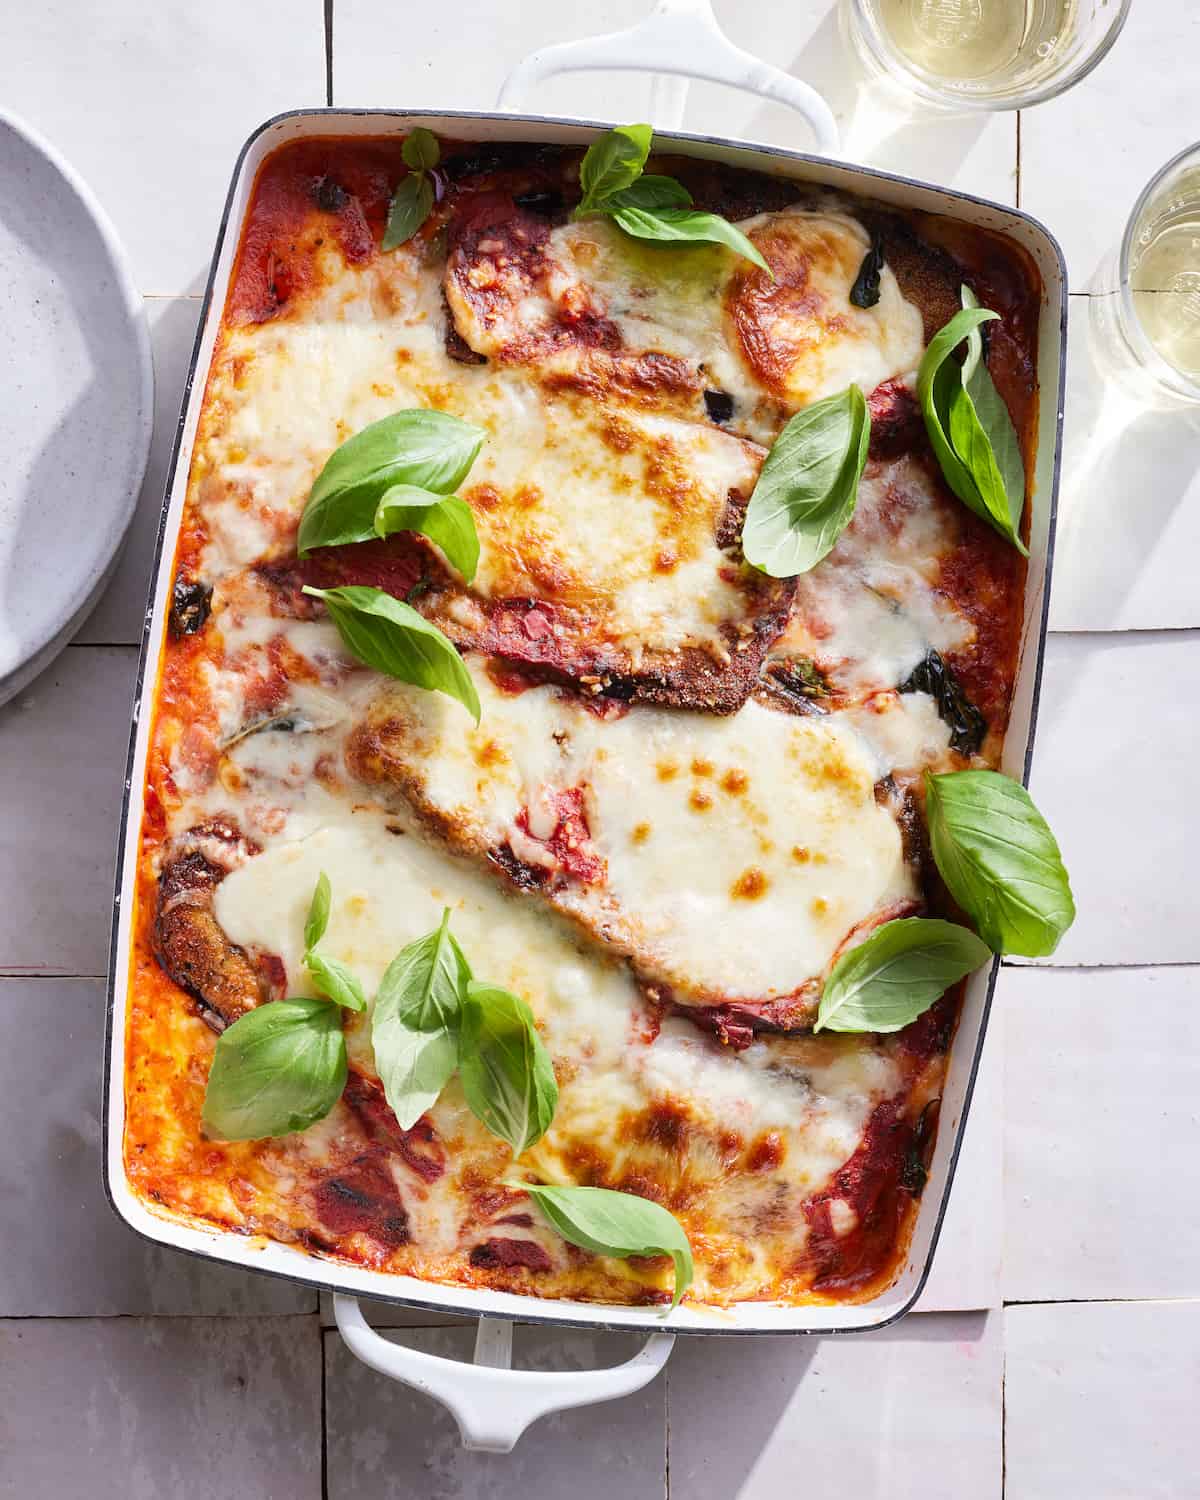 Prepared eggplant parmesan in ceramic baking dish sitting on a countertop surrounded by a ceramic plate and two drinking glasses.